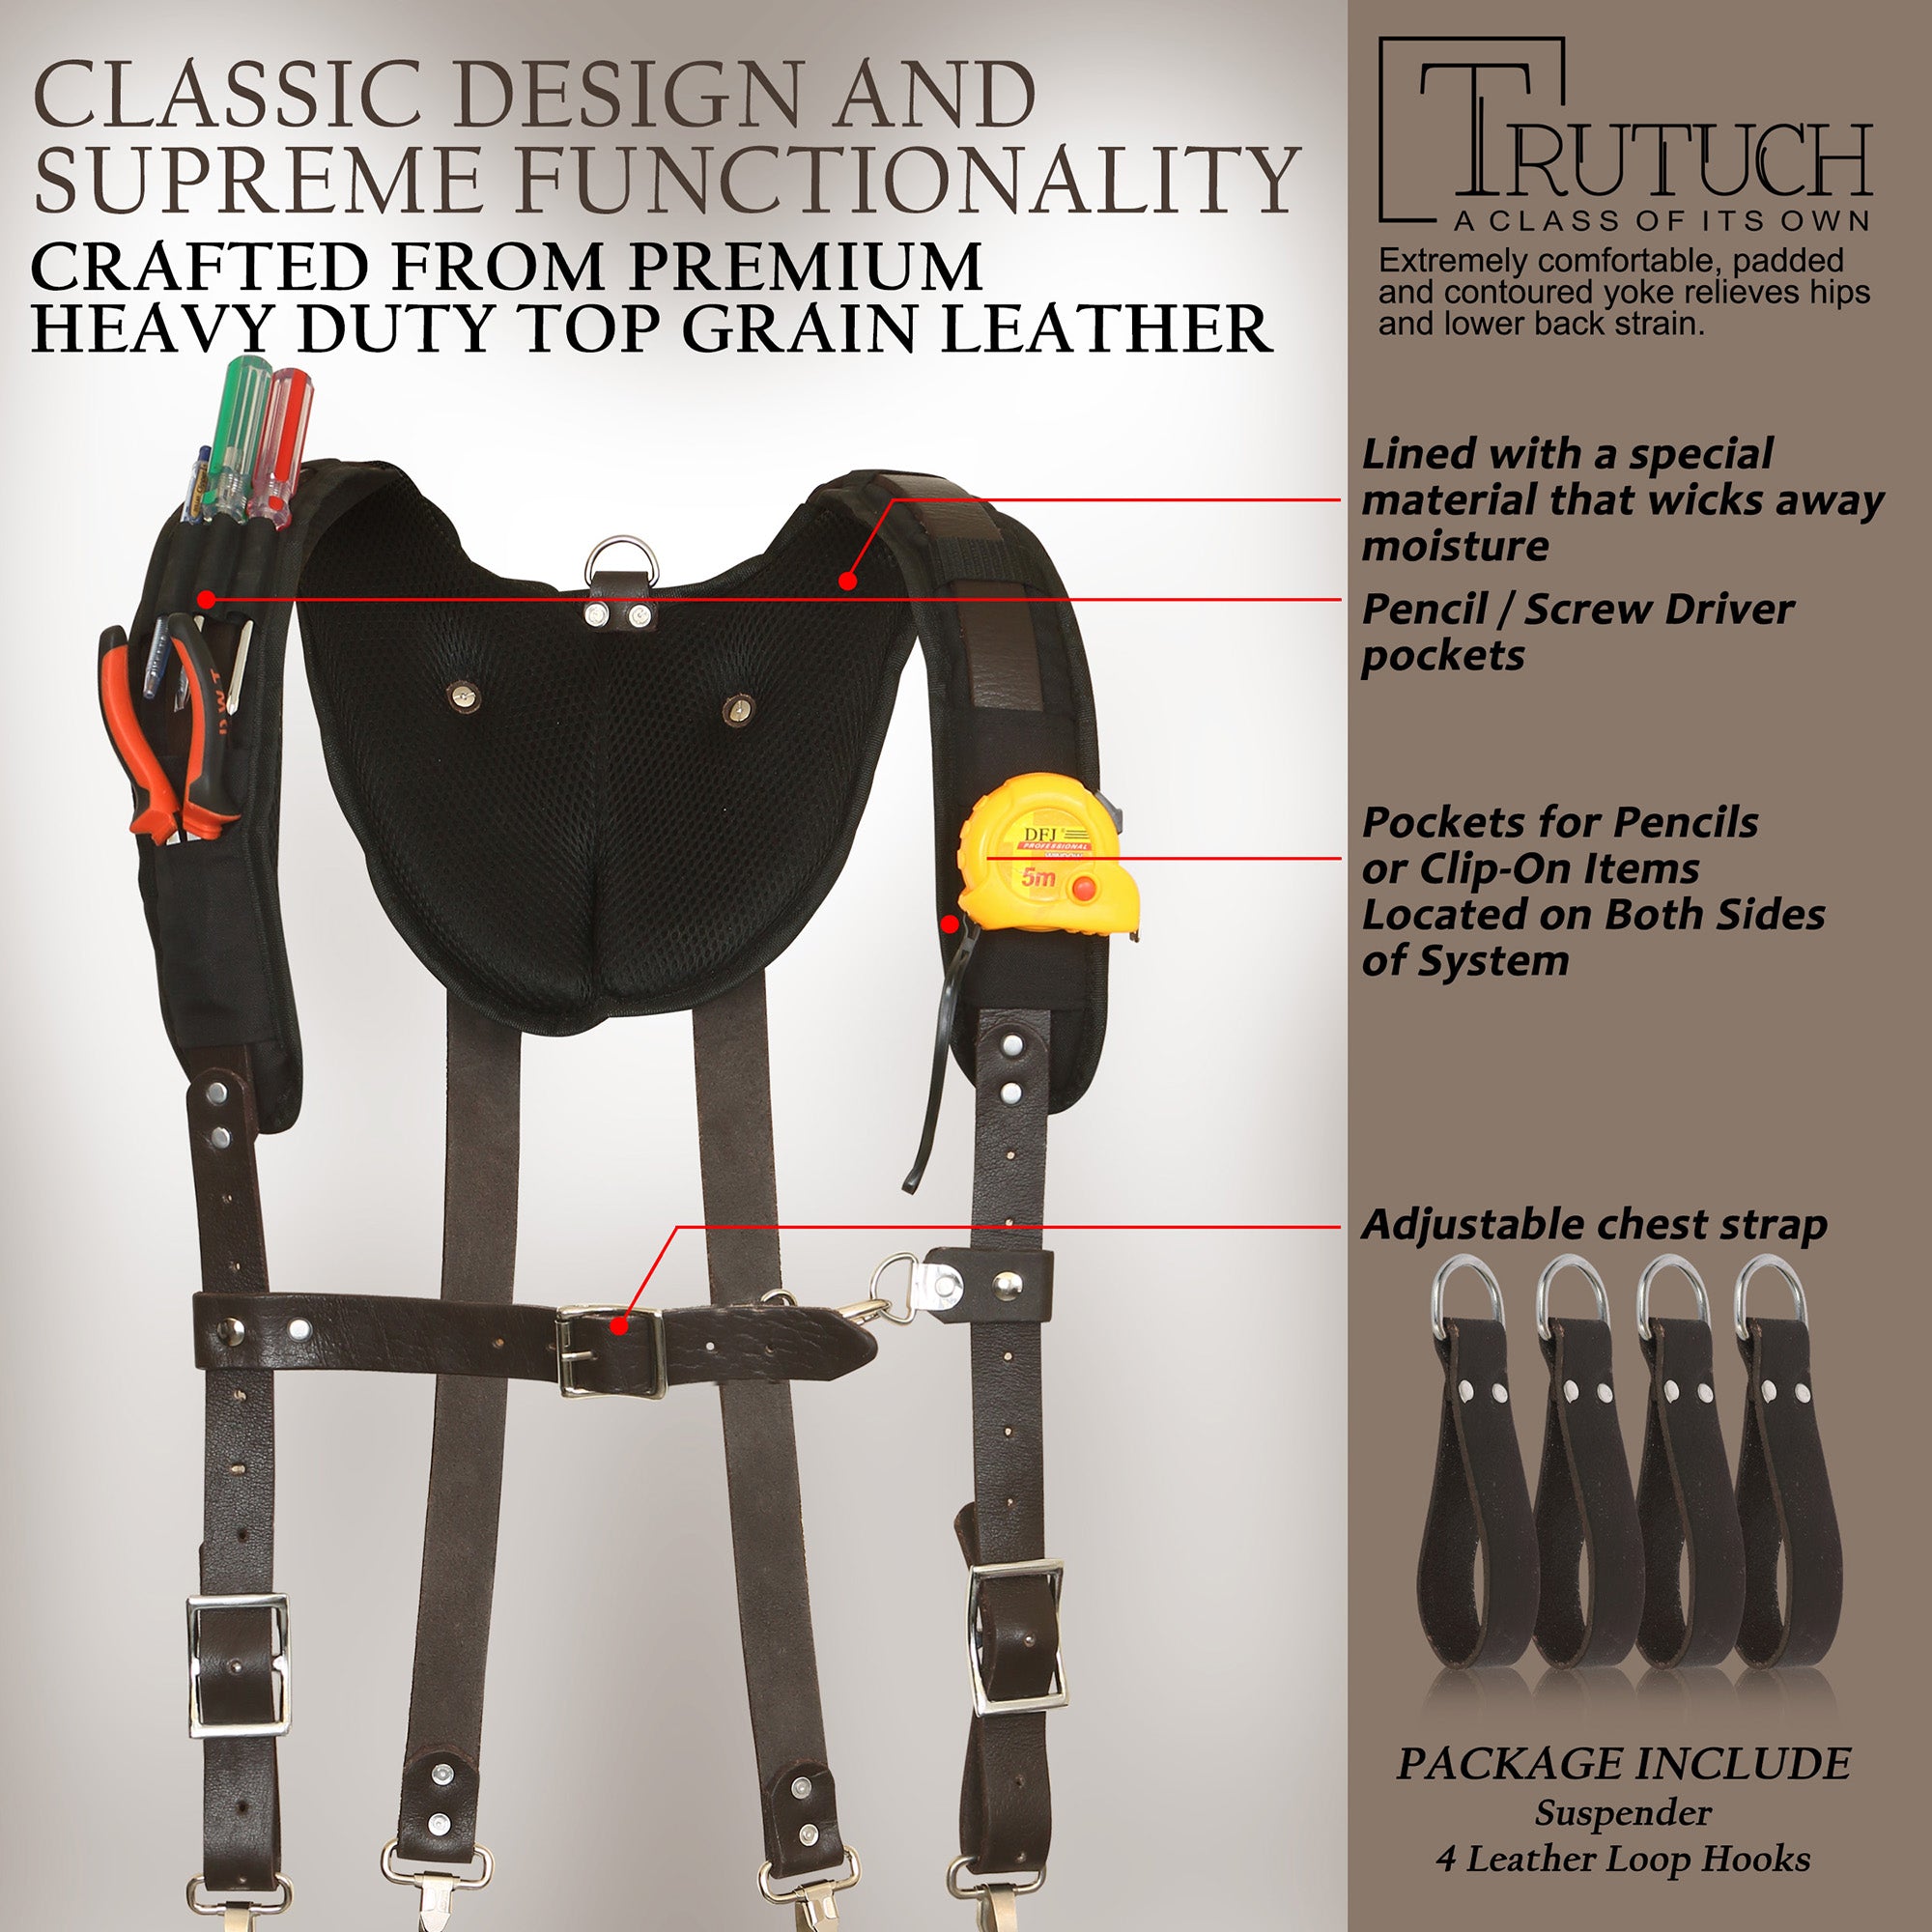 Trutuch Leather Work Suspenders With Pockets, Comfortable Padded Yoke Leather Tool Belt Suspenders, Chocolate Suspension System, TT-7020-S